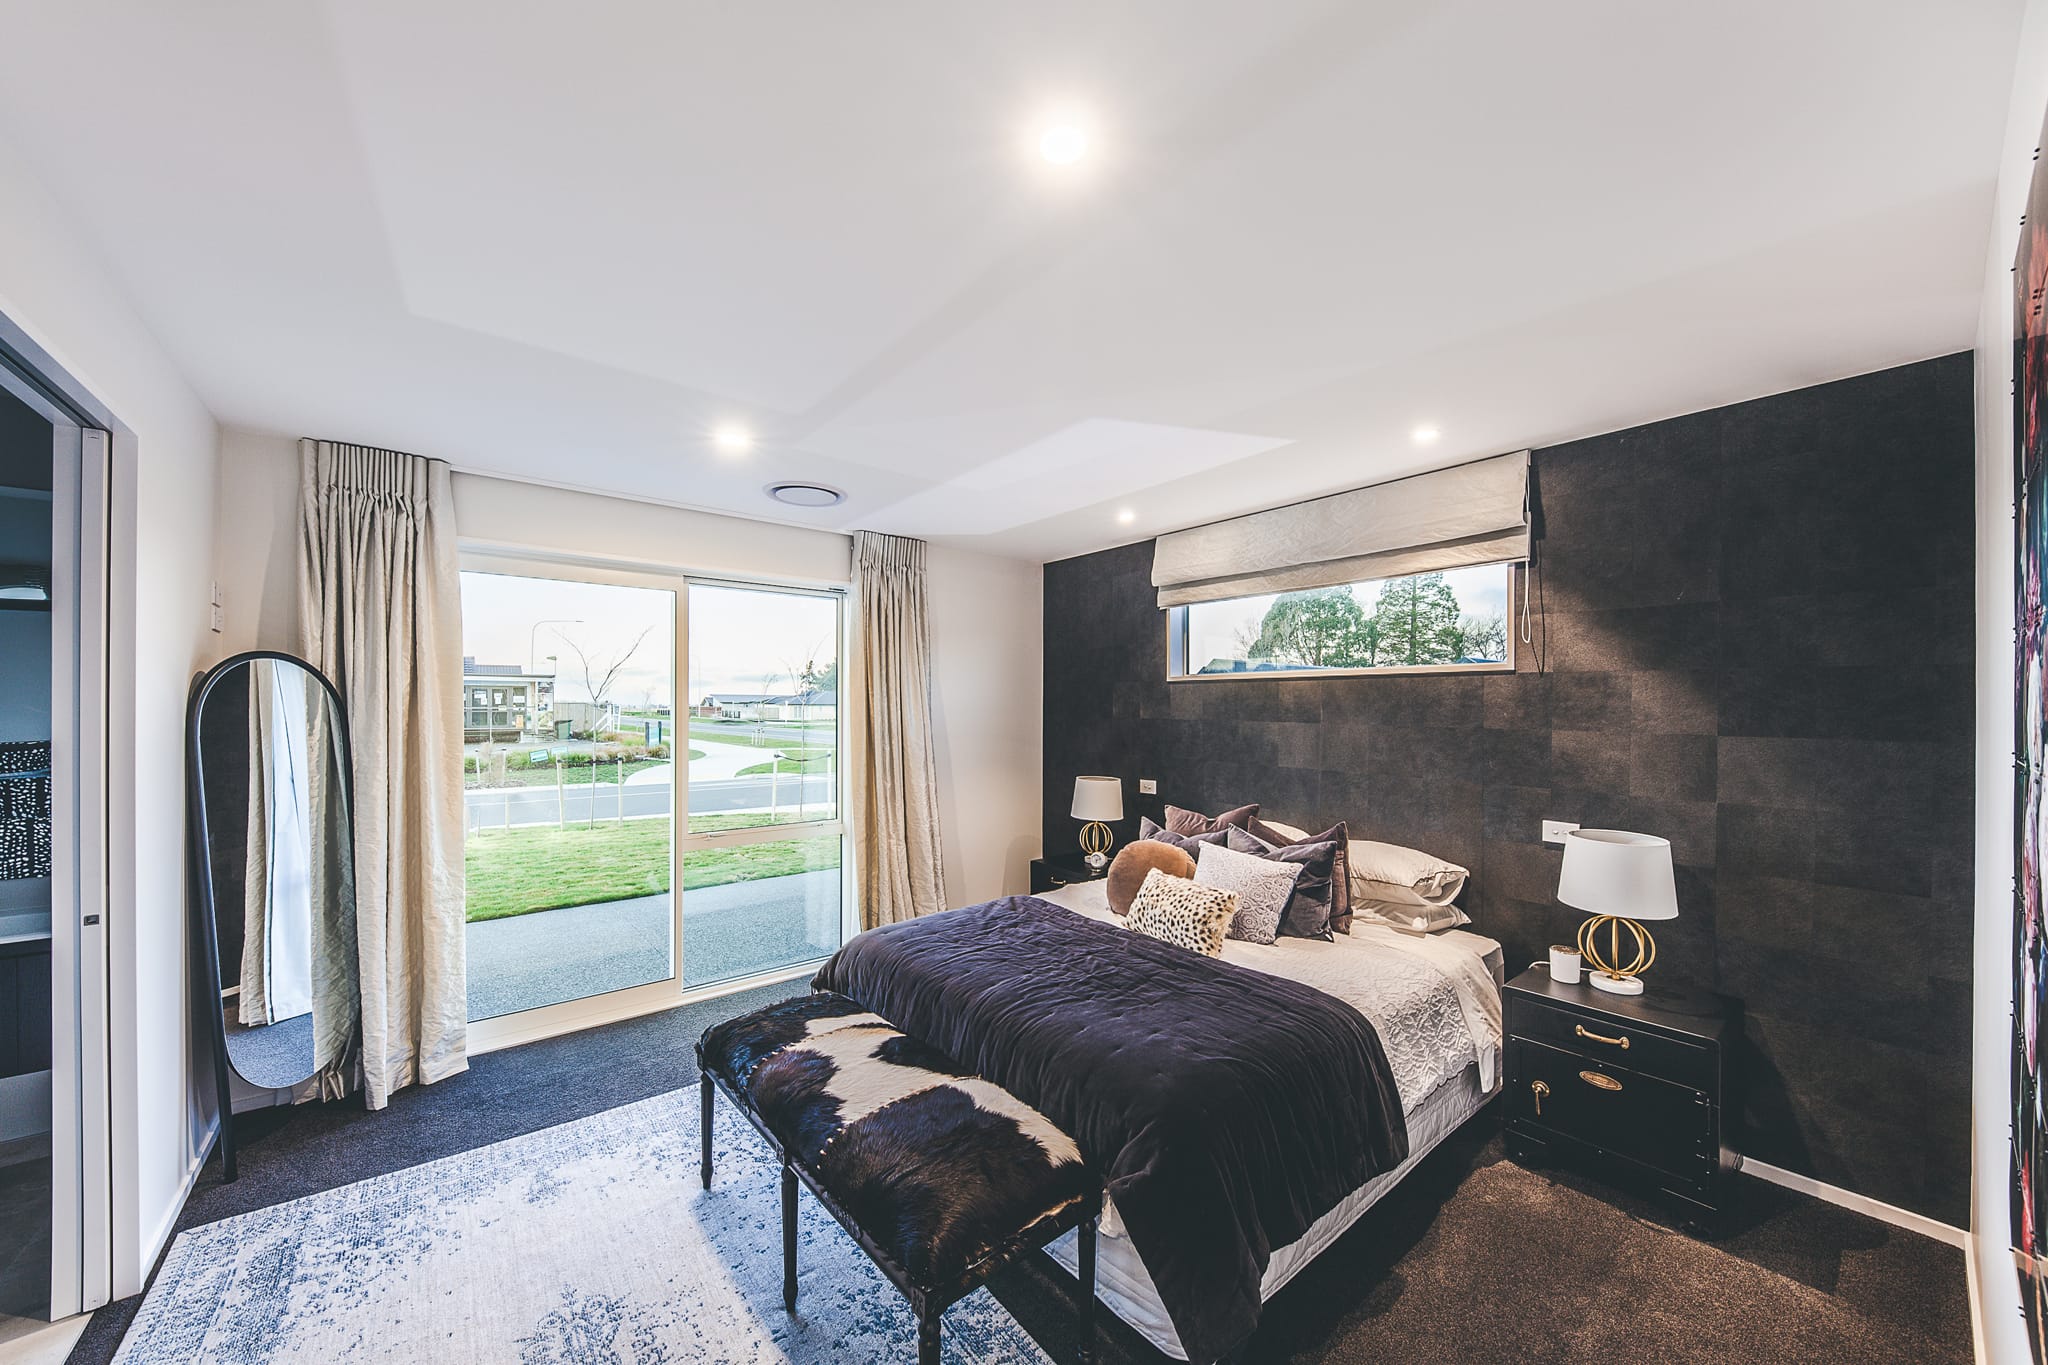 In Christchurch, Kaiapoi, Rangiora and wider Canterbury, Trendsetter Homes have built this new home and many others